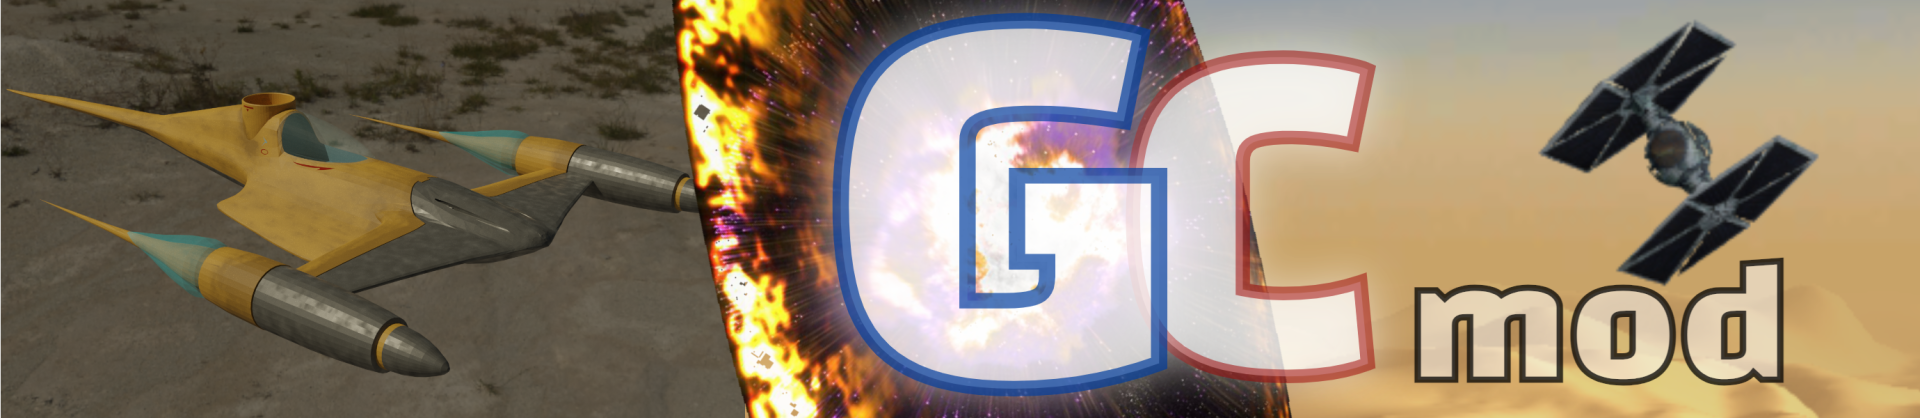 gc_banner01.png